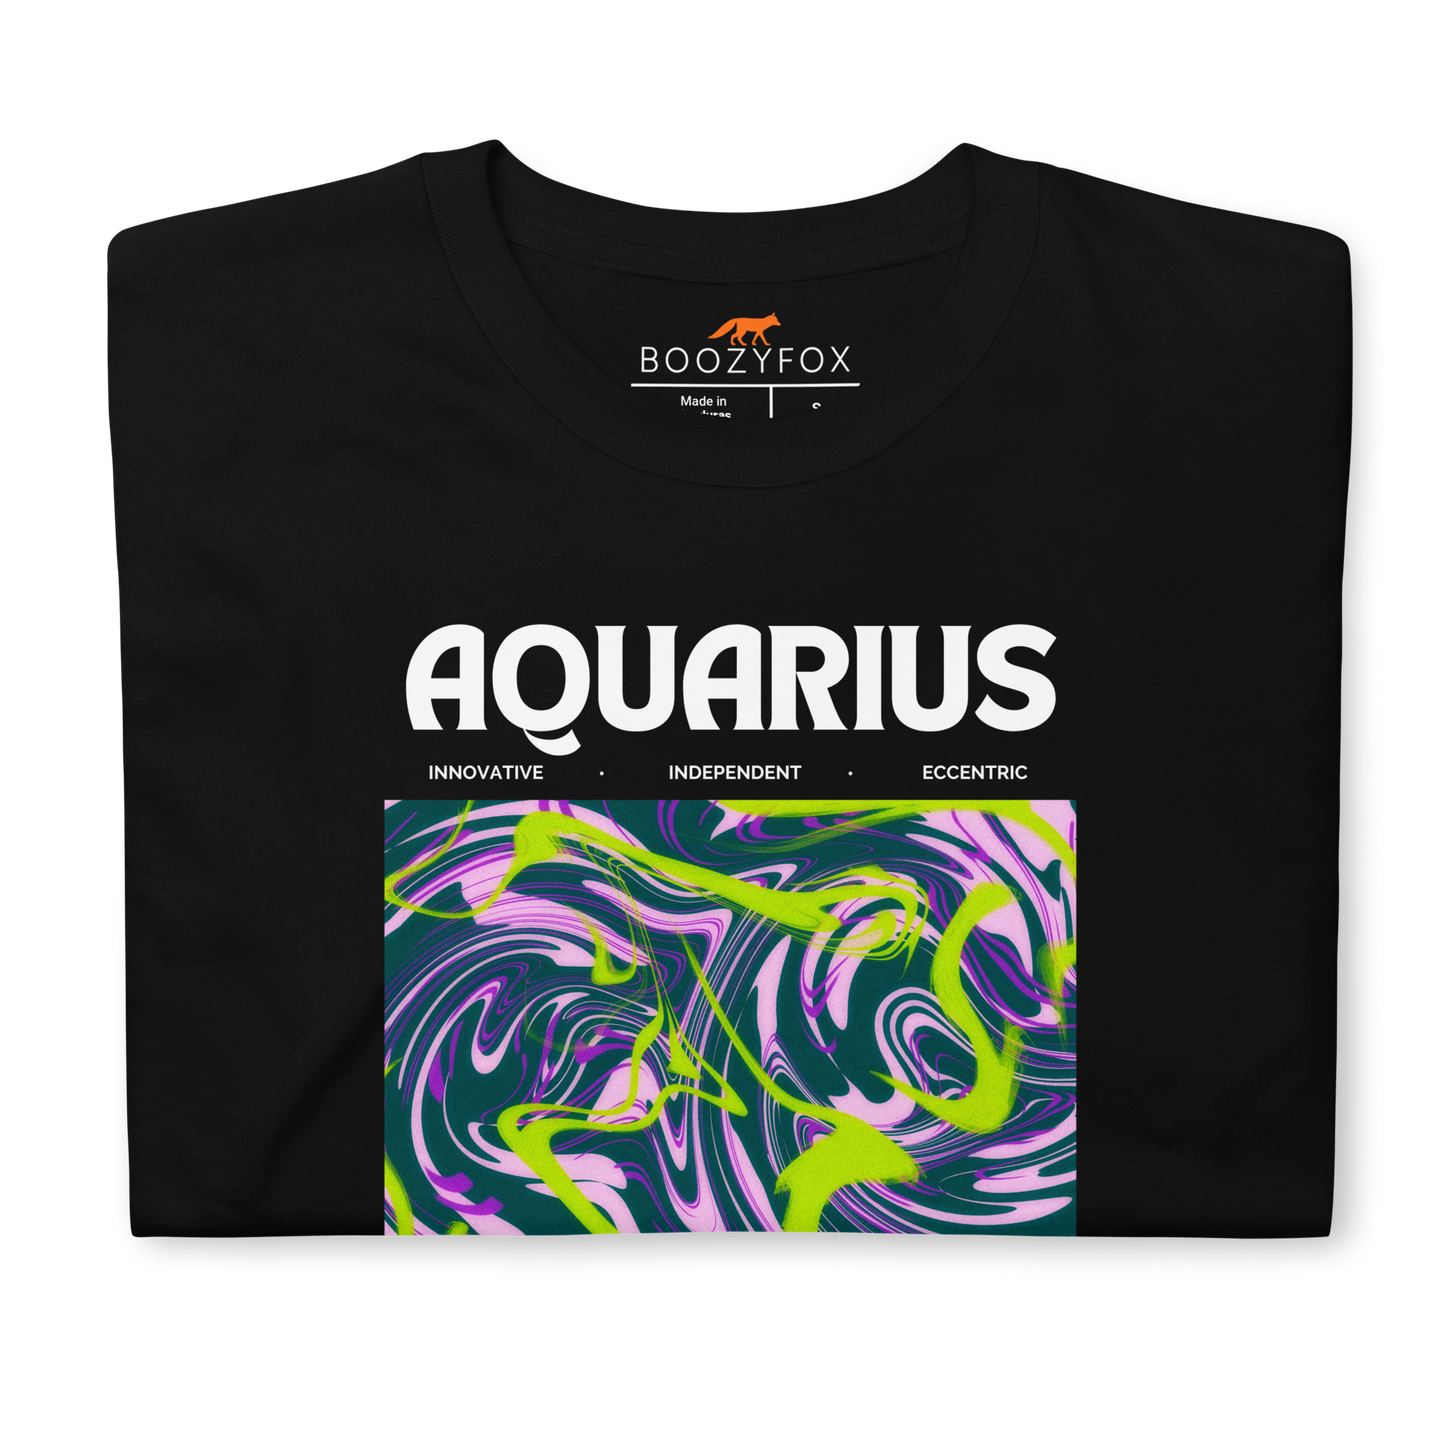 Front details of a Black Aquarius T-Shirt featuring an Abstract Aquarius Star Sign graphic on the chest - Cool Graphic Zodiac T-Shirts - Boozy Fox